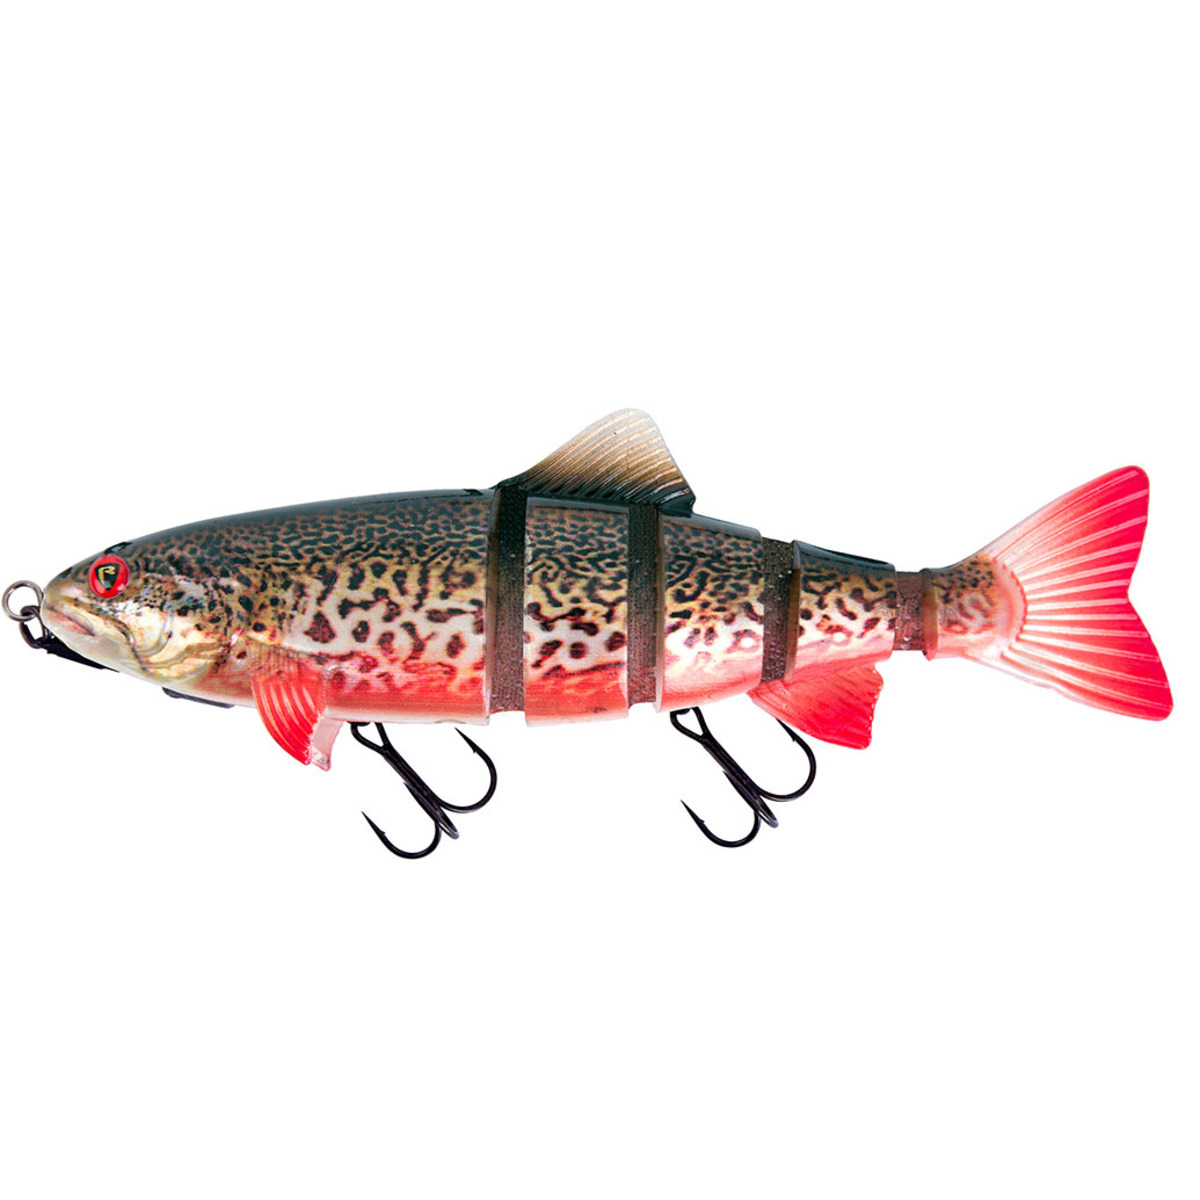 Fox Rage Replicant Realistic Trout Jointed Shallow 14  Cm / 5.5  40 G - Super Natural Tiger Trout